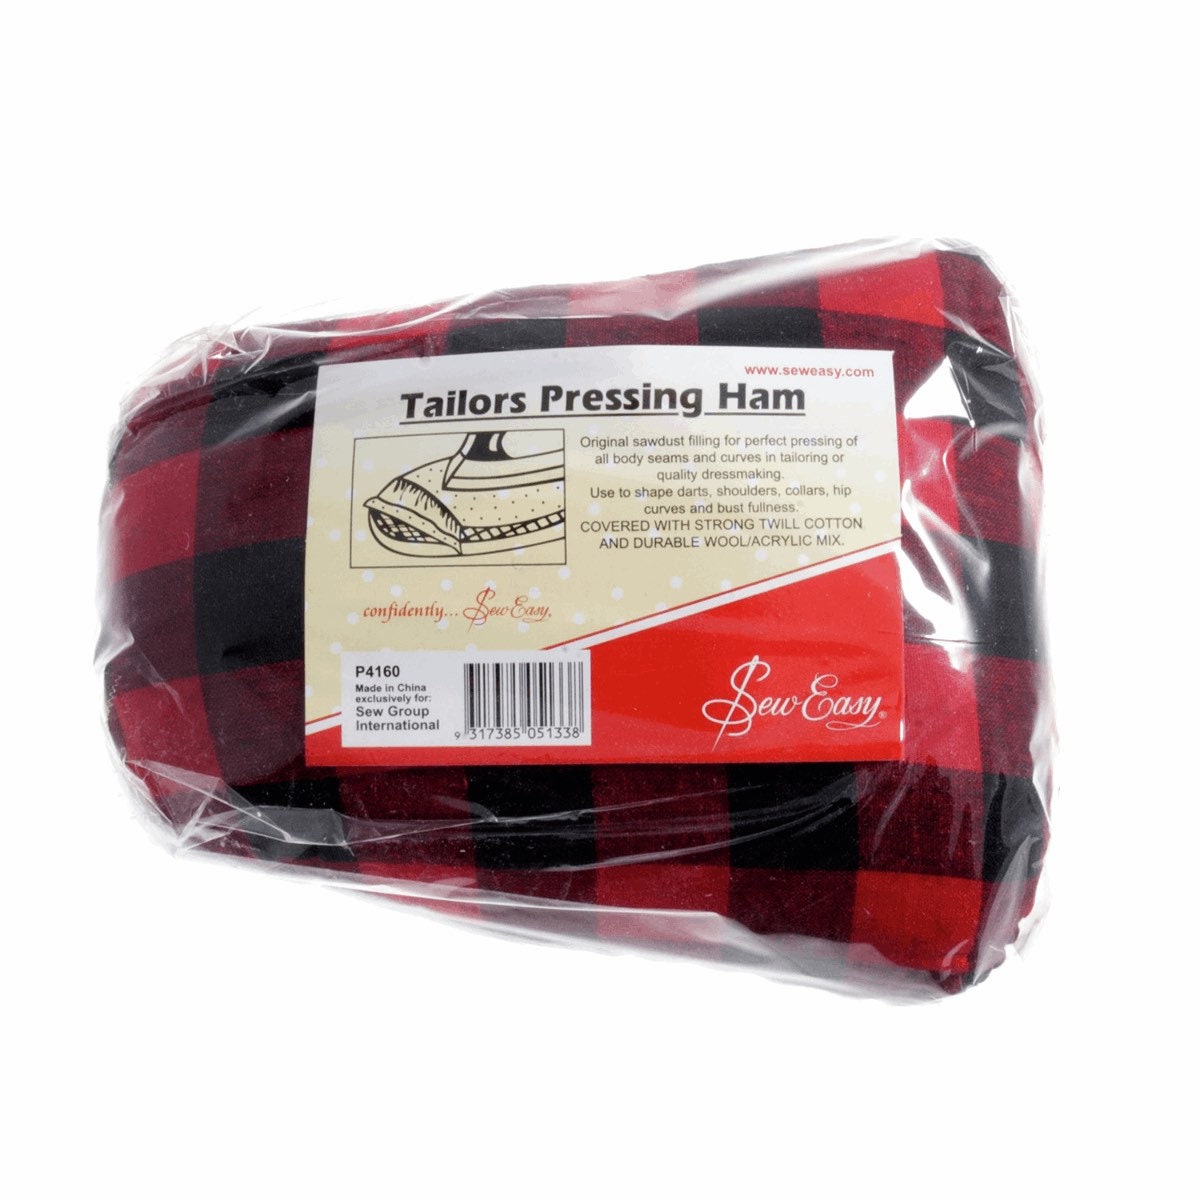 2 Sizes Tailors Ham Seam Roll for Ironing Pressing Tools, Ironing